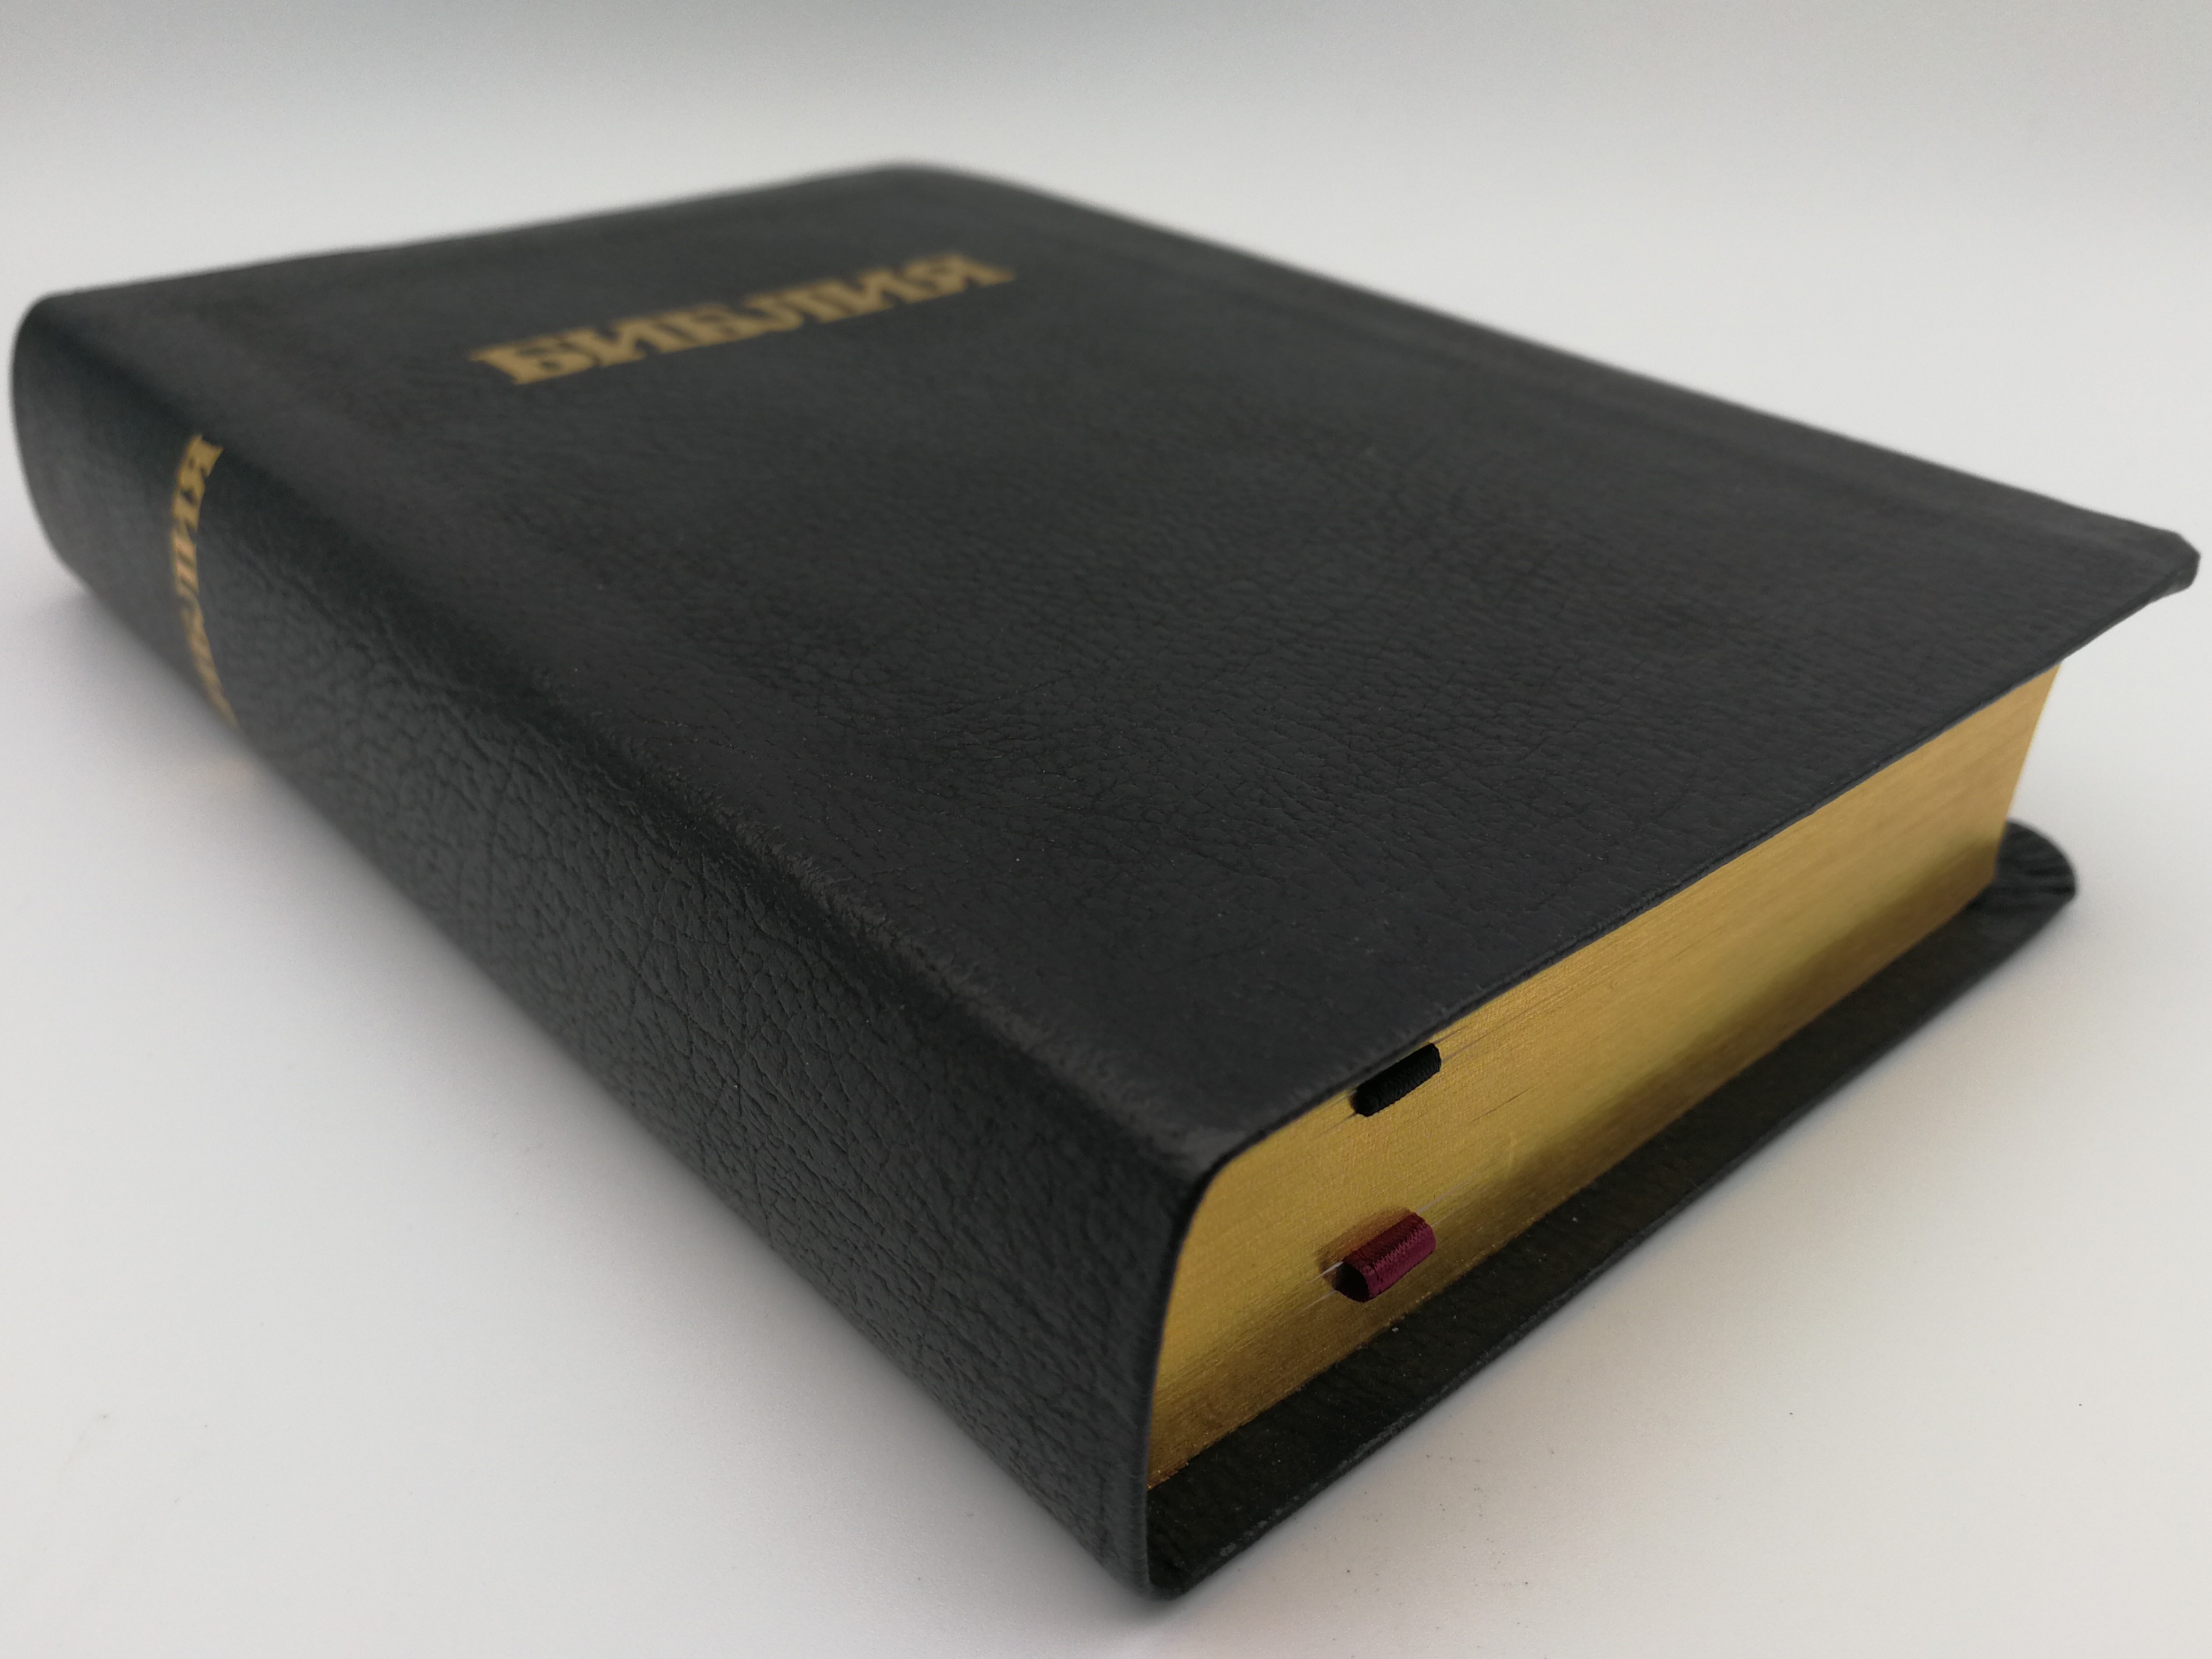 Russian Bonded Leather Scofield Reference Bible with Golden edges ...